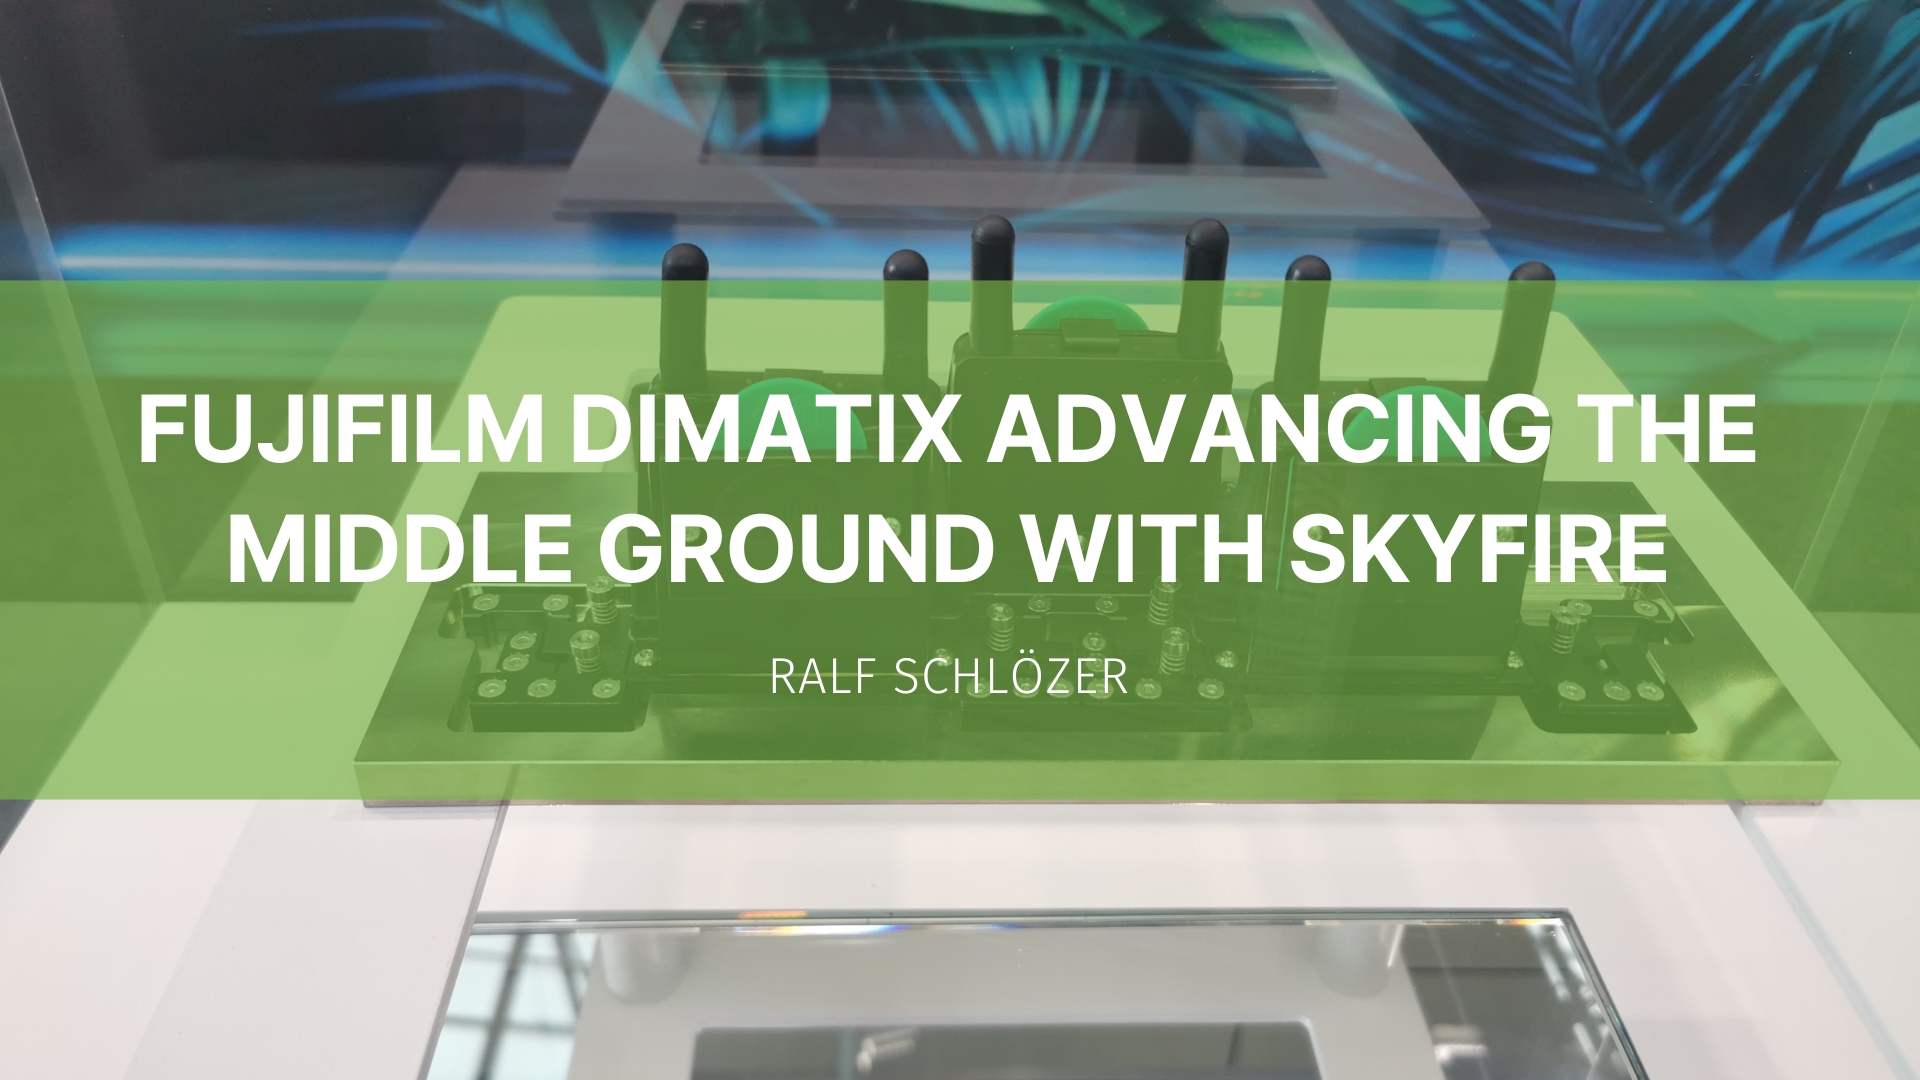 Featured image for “Fujifilm Dimatix Advancing the middle ground with SkyFire”